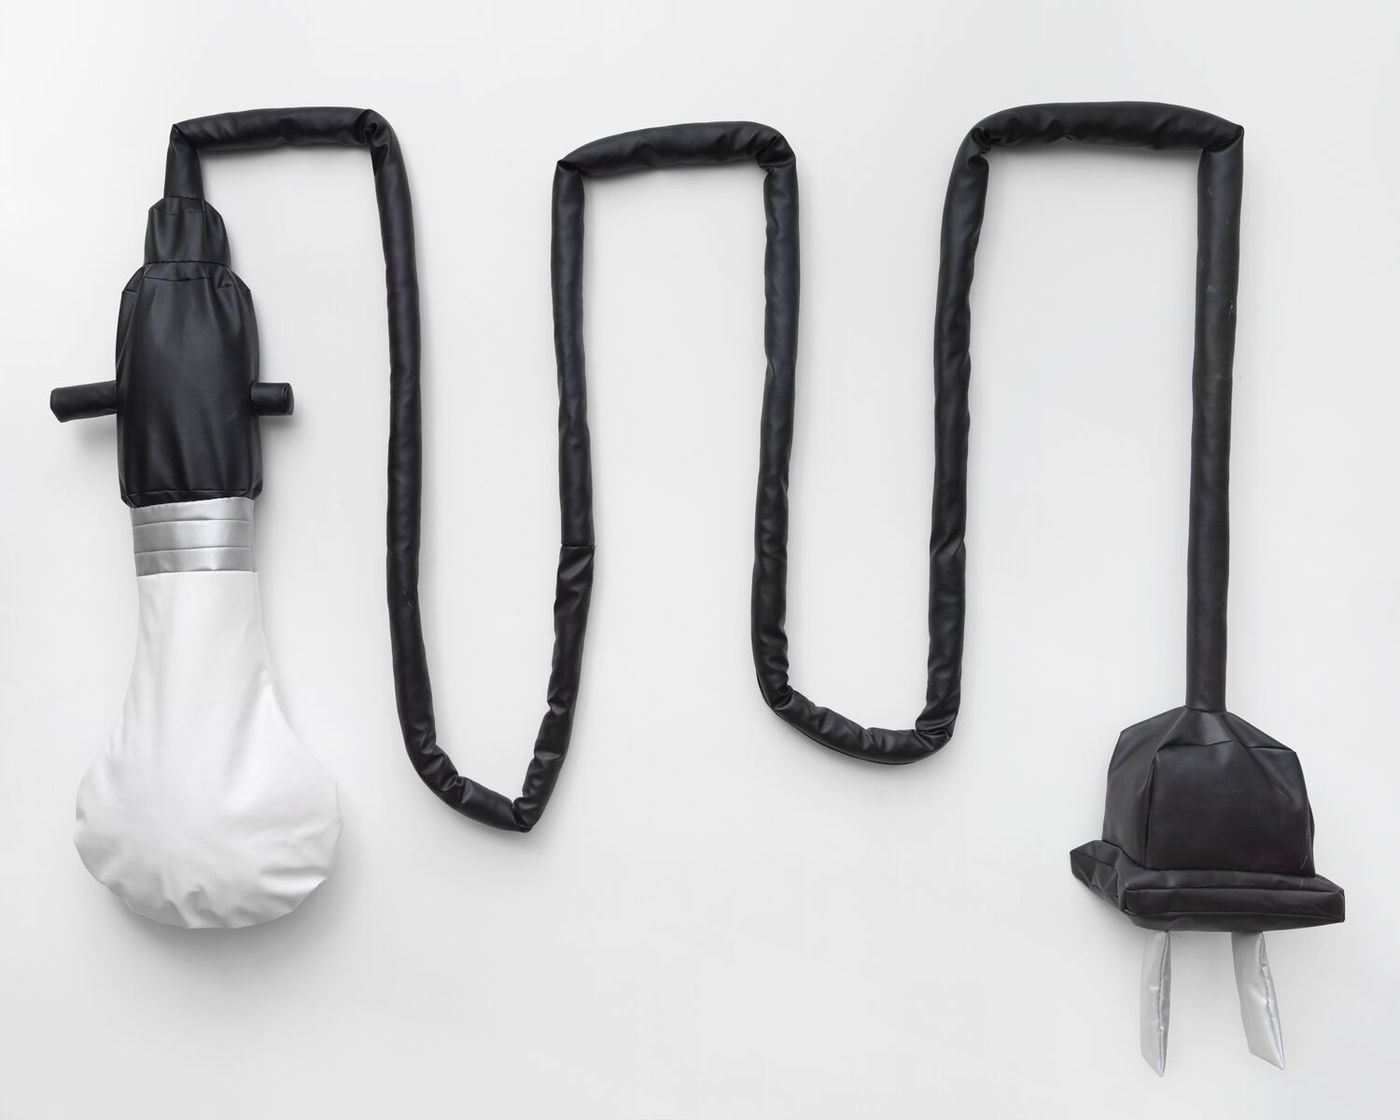 Image of Soft Lightbulb with Black Cord, 2018: Vinyl and polyfill